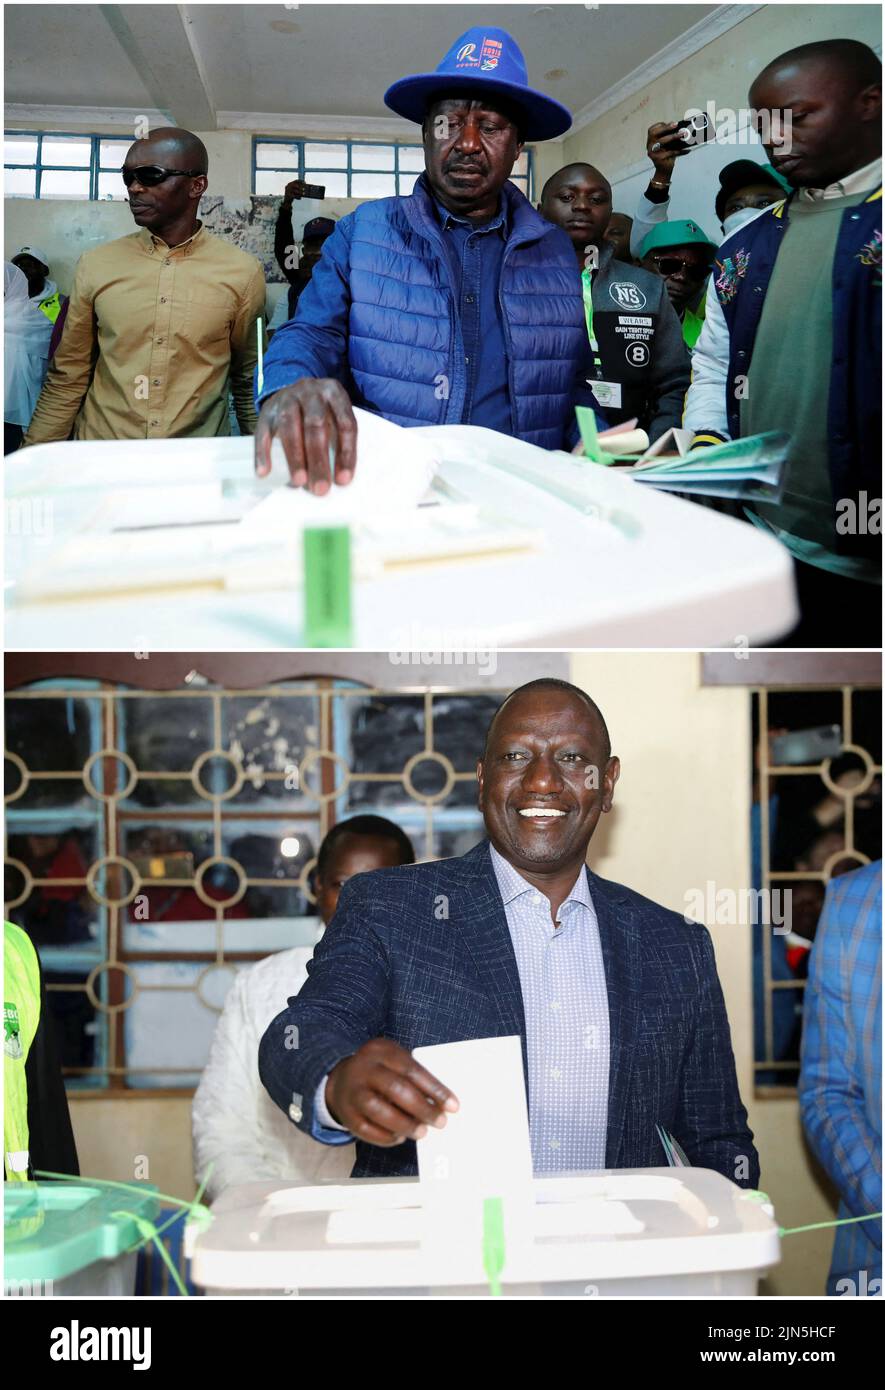 A combination picture shows Kenya's opposition leader and presidential candidate Raila Odinga, of the Azimio La Umoja (Declaration of Unity) One Kenya Alliance, casting his ballot at Kibera Primary School, outside the Kibera slums of Nairobi (top) and Kenya's Deputy President and presidential candidate William Ruto casting his vote at Kosachei Primary School (bottom), during the general elections in Kenya August 9, 2022. REUTERS/Thomas Mukoya/Baz Ratner Stock Photo